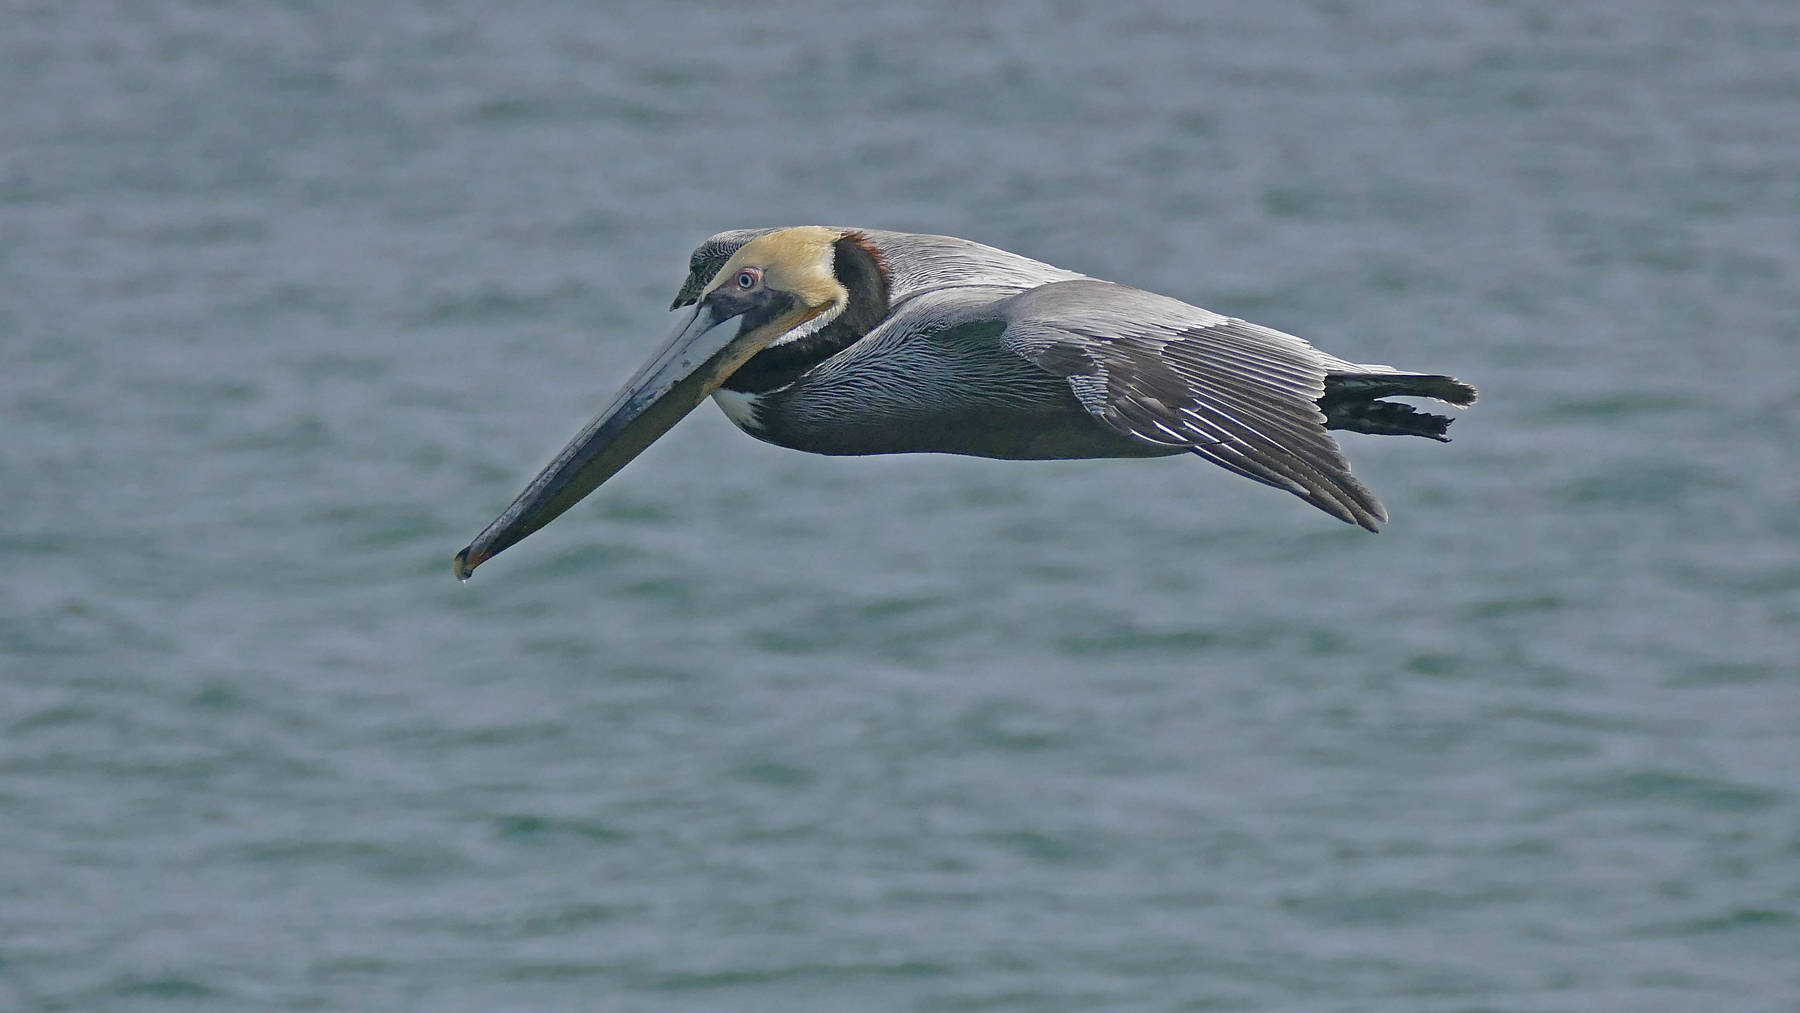 Brown pelicans are common on the docks, on the beaches, and plunging into schools of sardines. (Courtesy Photo | Bob Armstrong)